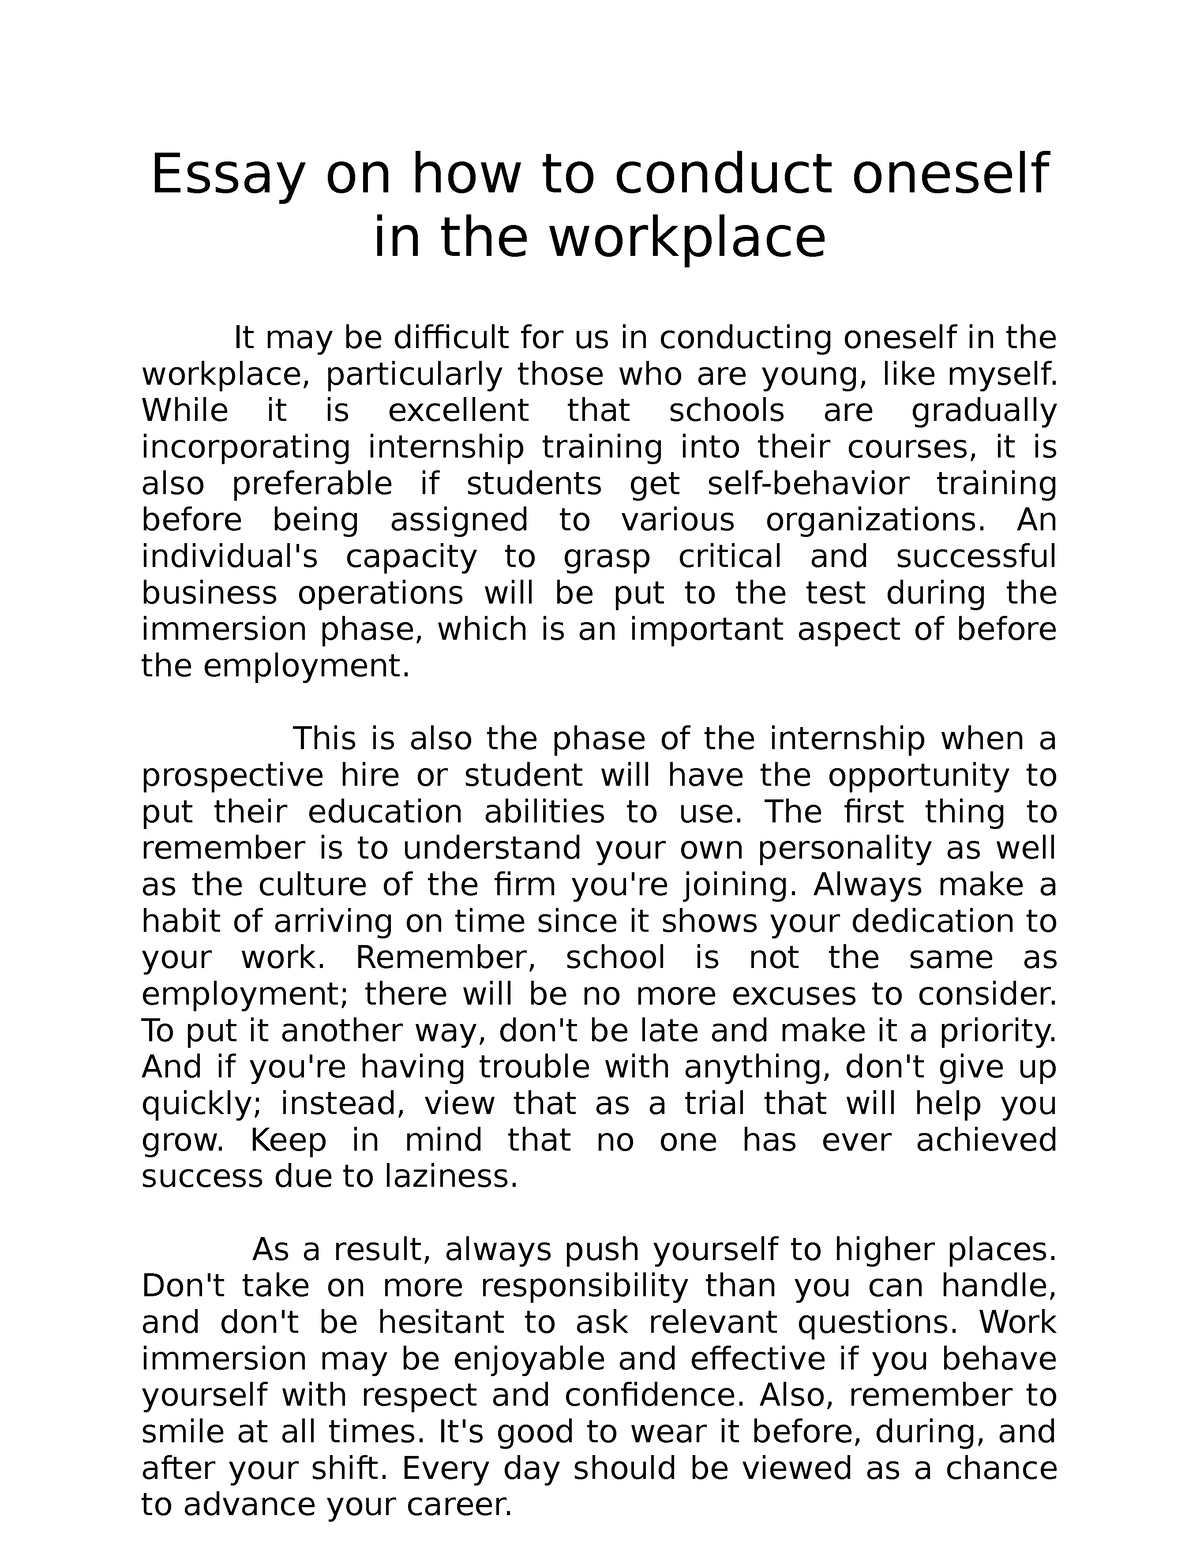 essay on how to conduct oneself in work immersion scribd